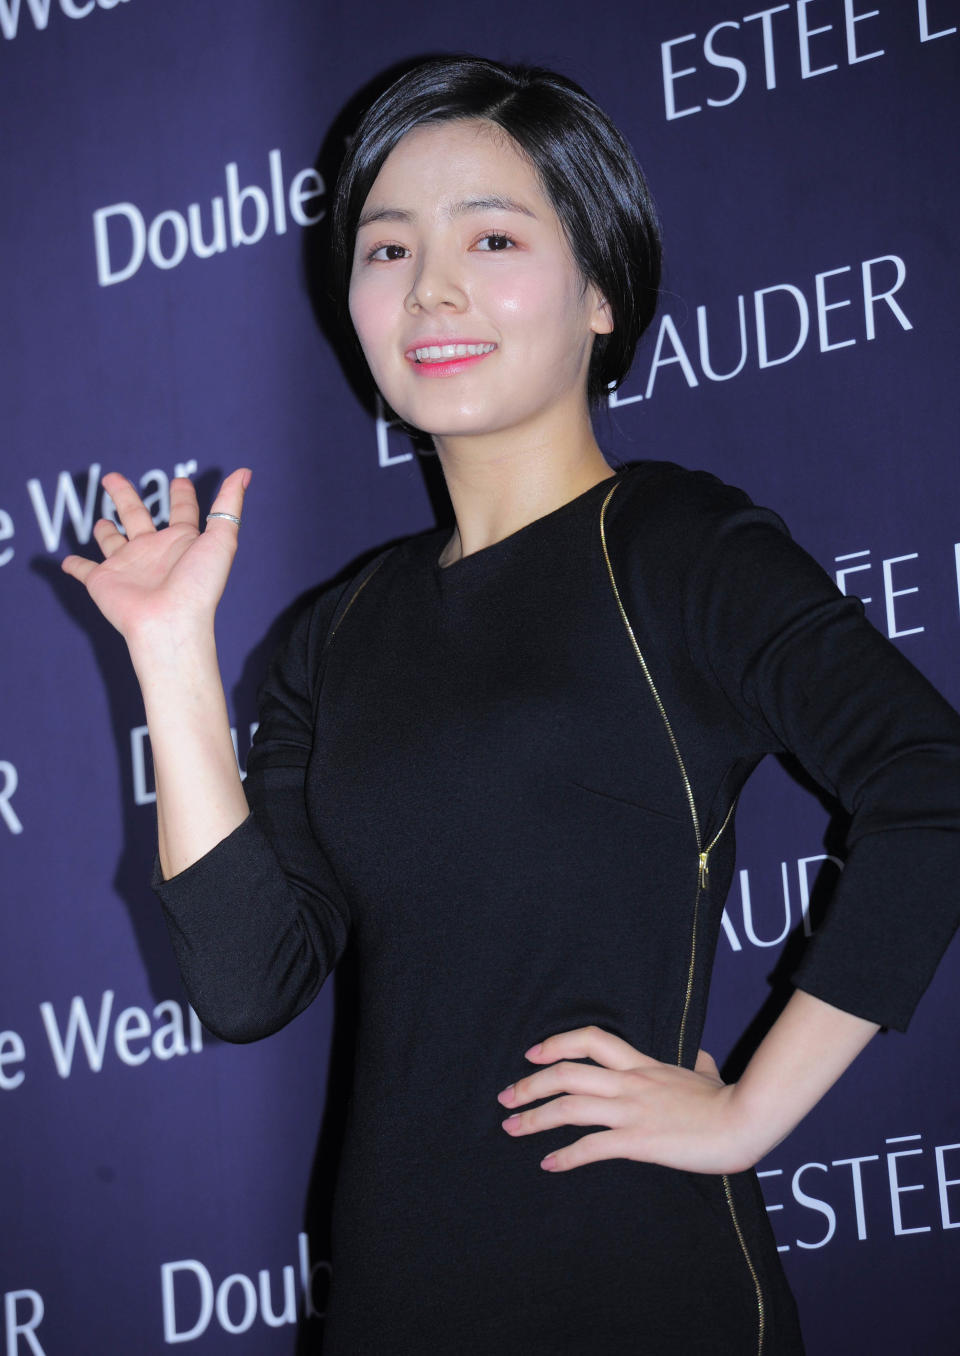  Song Yoo-Jung attends the 'Estee Lauder' Double Wear Lounge Opening 